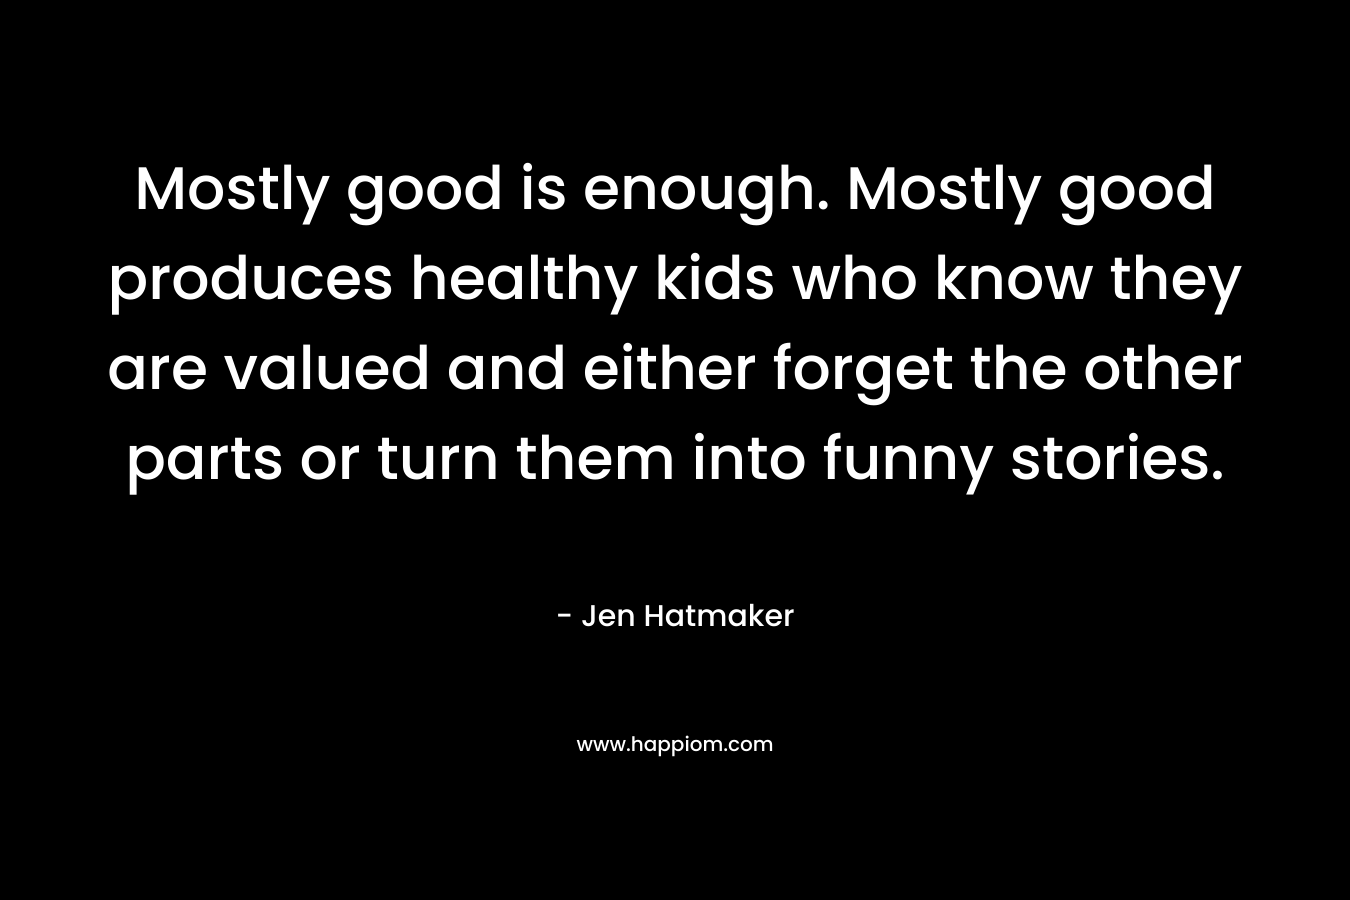 Mostly good is enough. Mostly good produces healthy kids who know they are valued and either forget the other parts or turn them into funny stories. – Jen Hatmaker